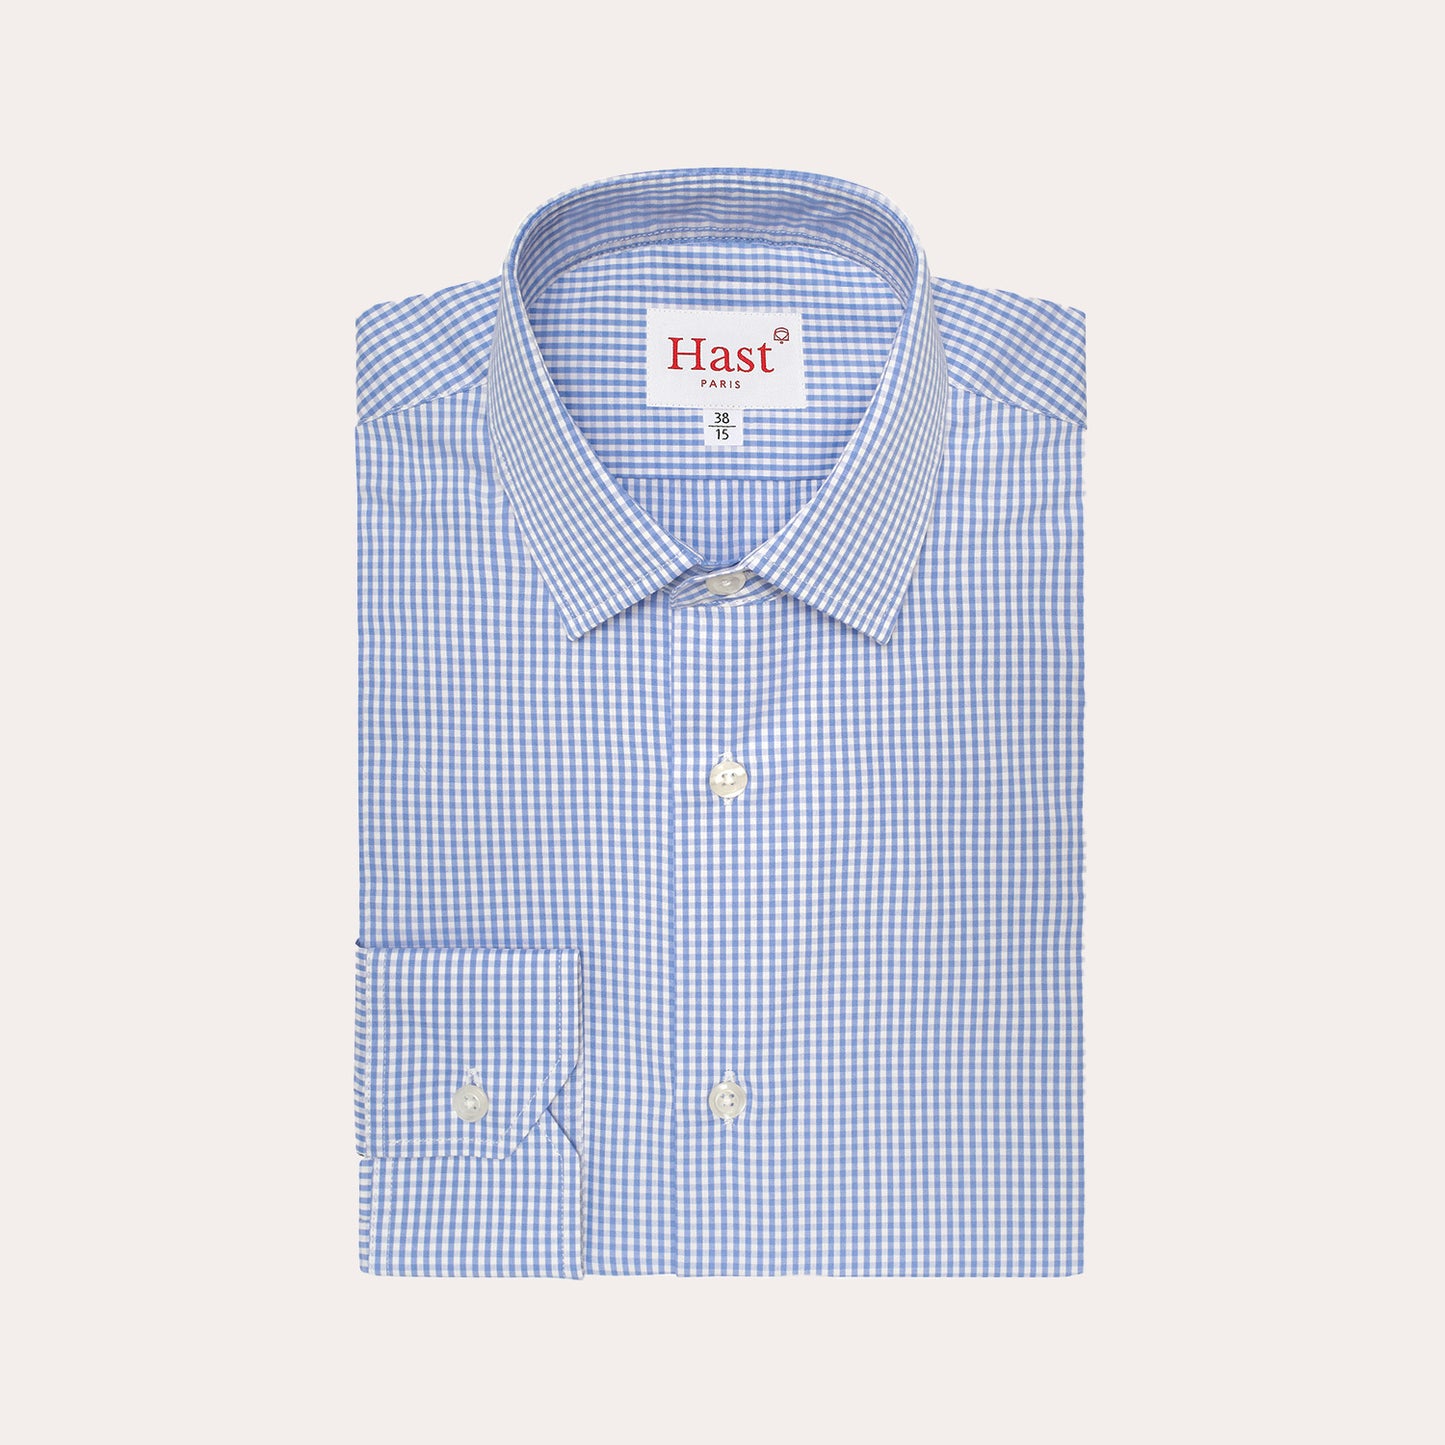 Fitted shirt in blue double-twisted gingham poplin